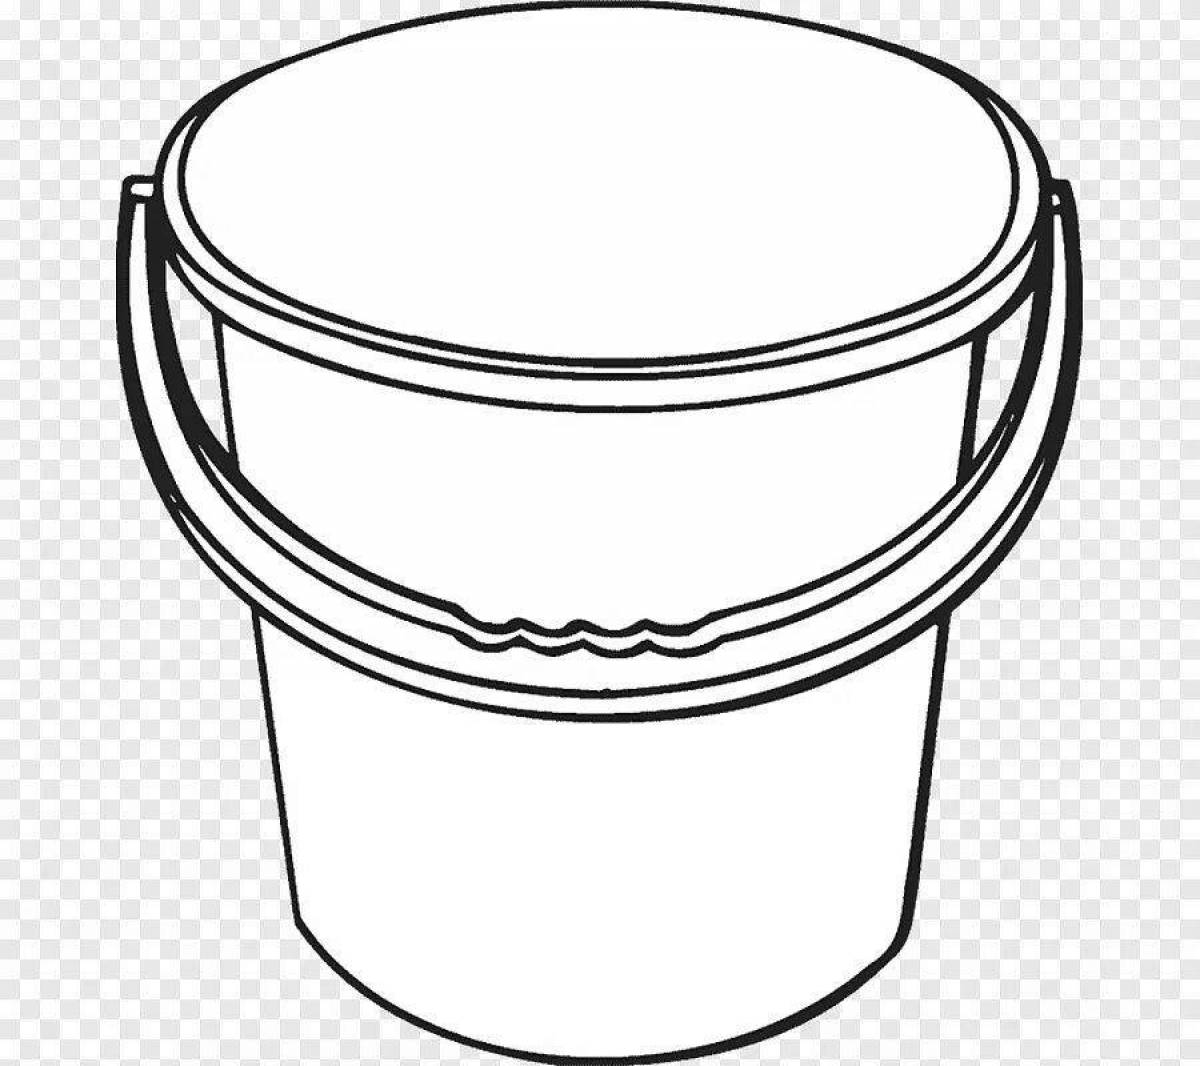 Exquisite bucket coloring page